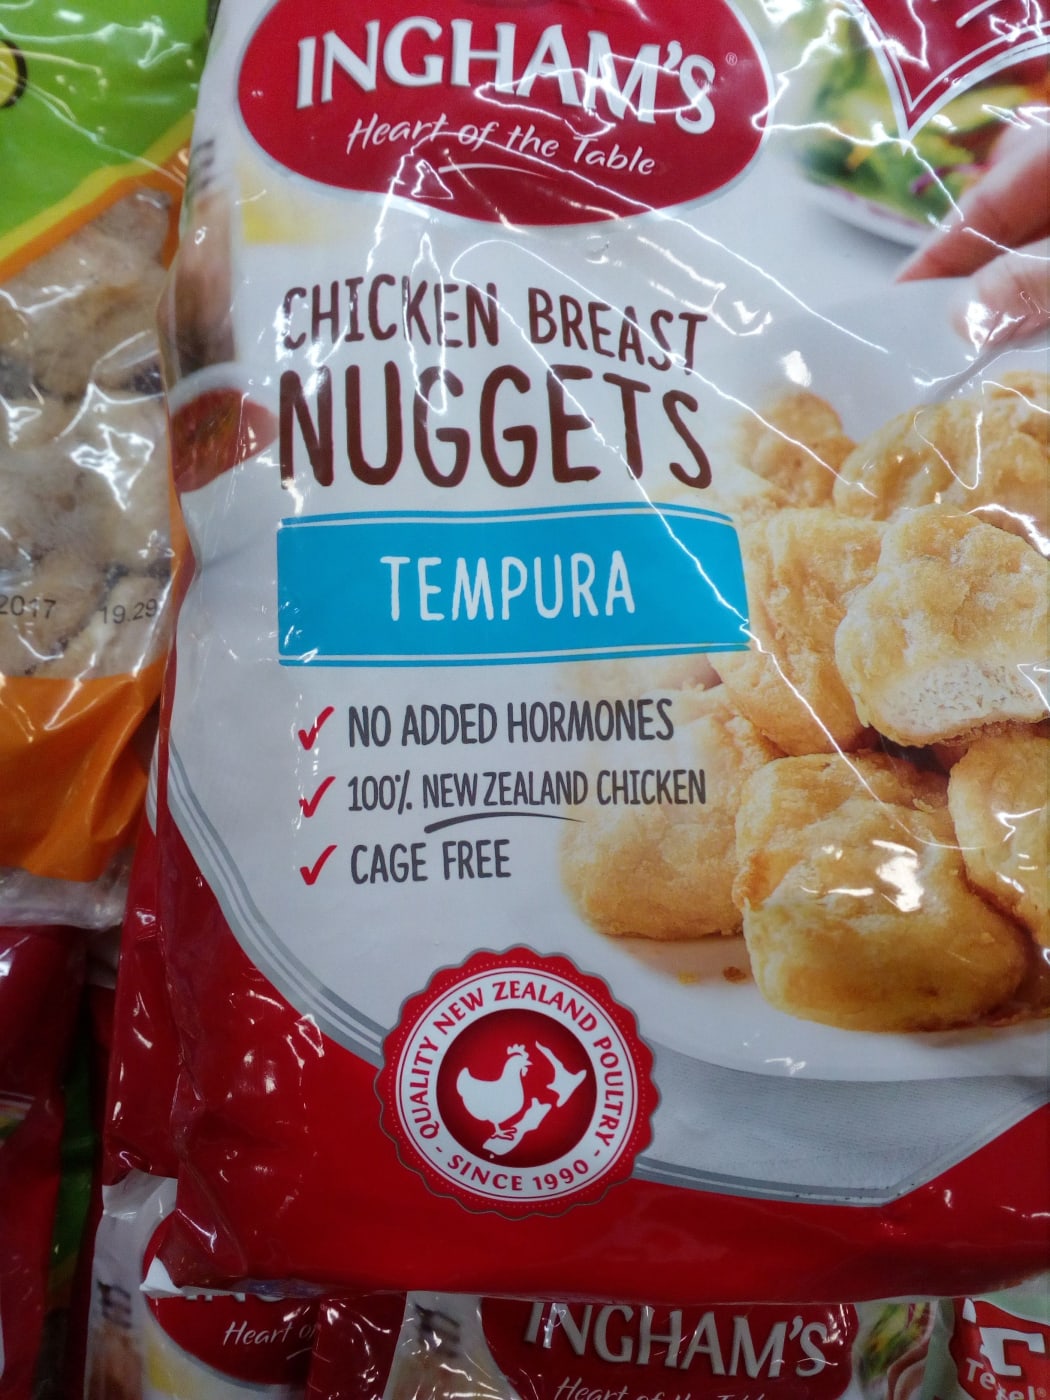 Cage free? It's all terribly confusing